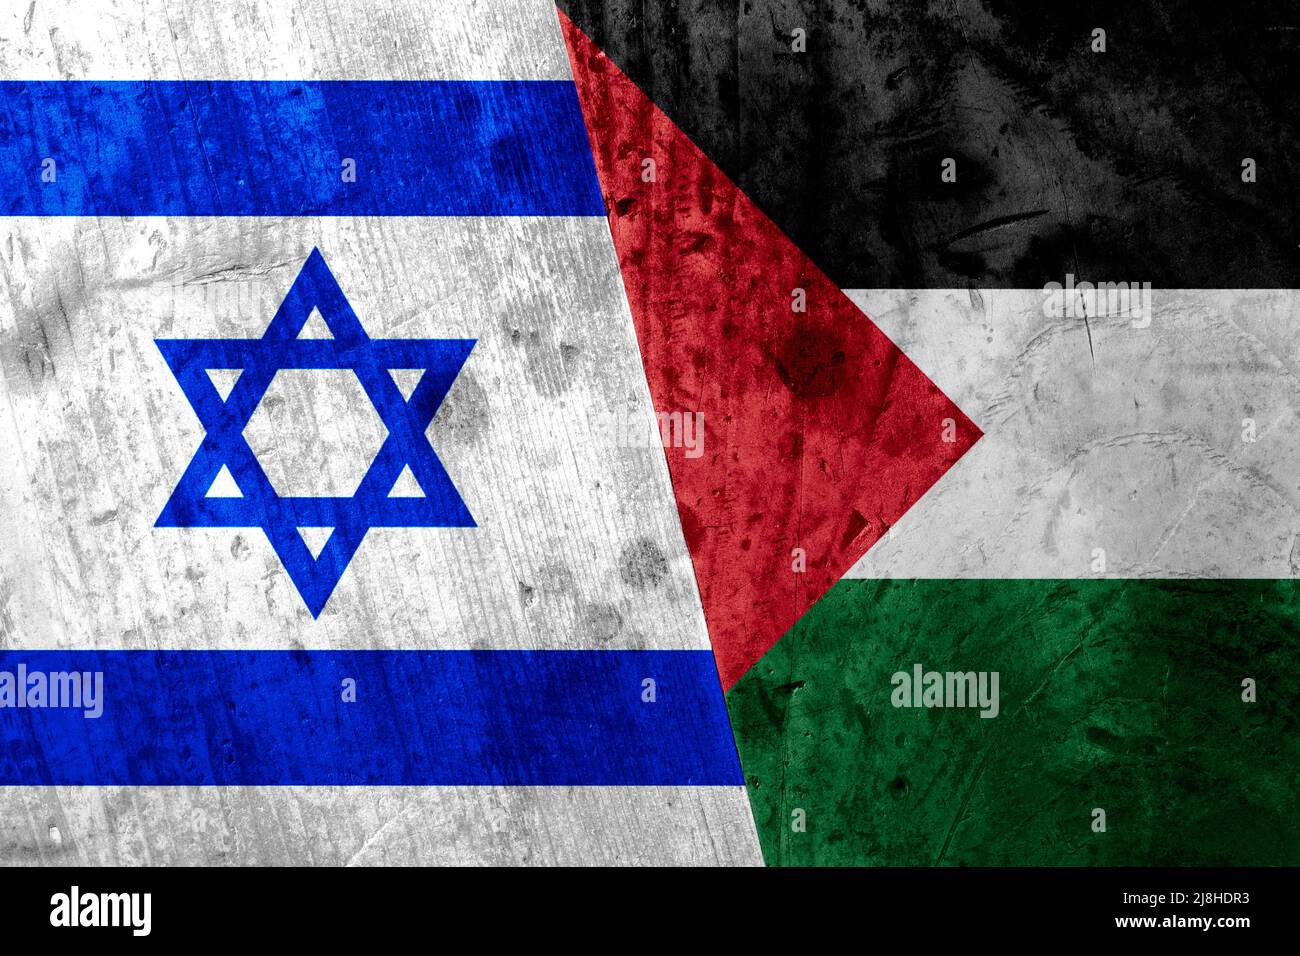 Flags of Israel and Palestine as a symbol of diplomacy. Stock Photo